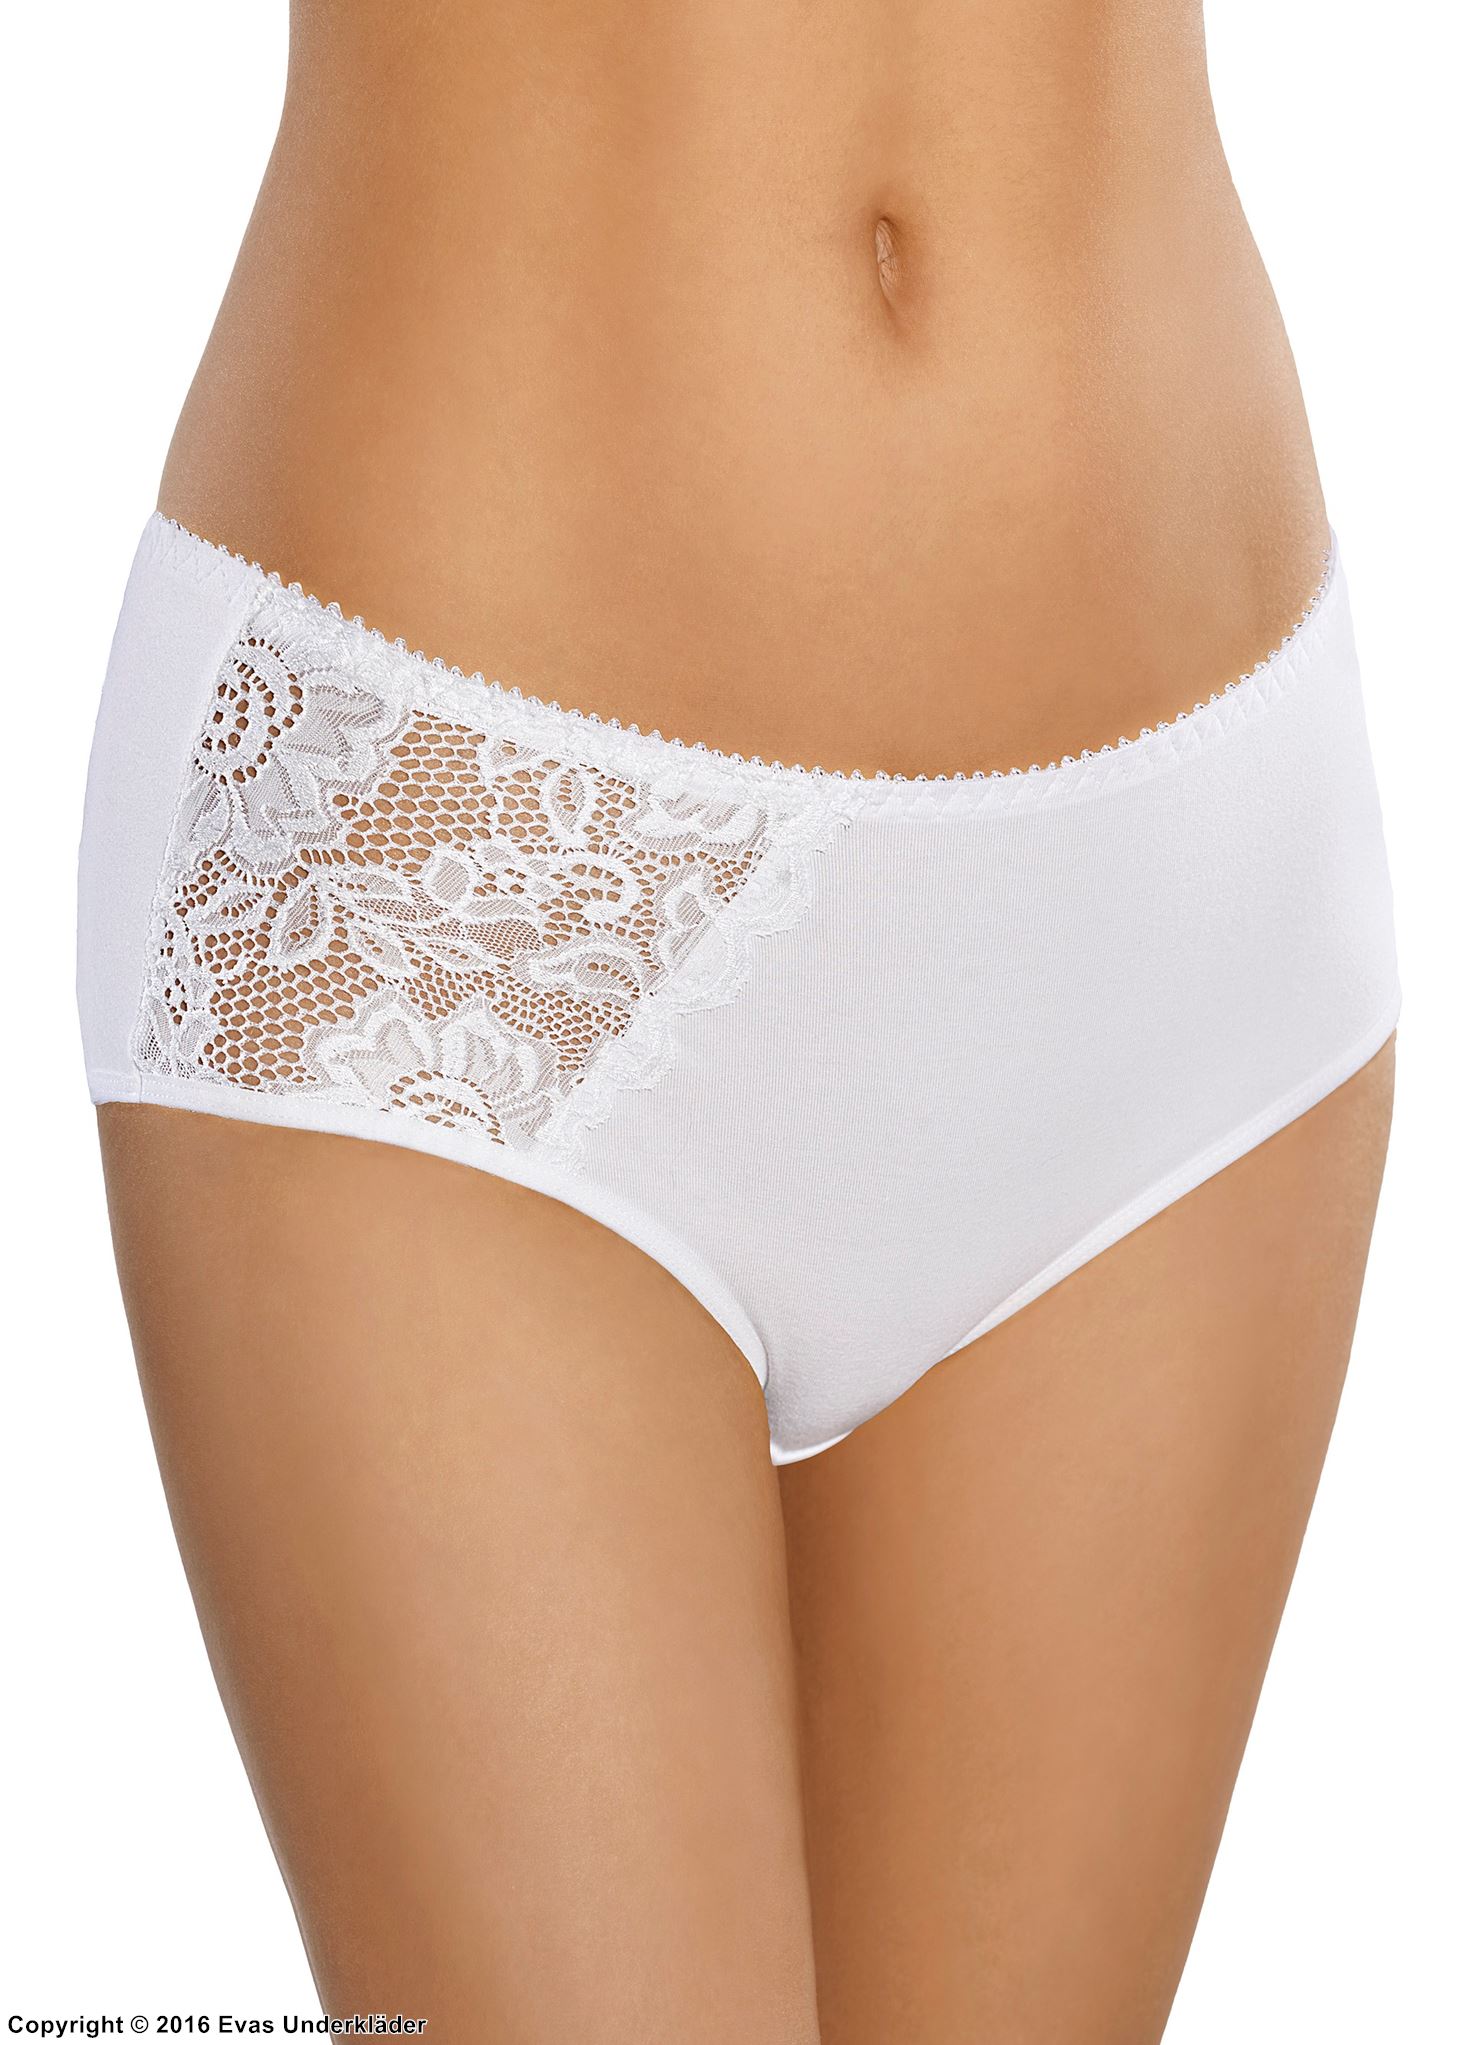 Classic briefs, high quality cotton, openwork lace, M to 3XL